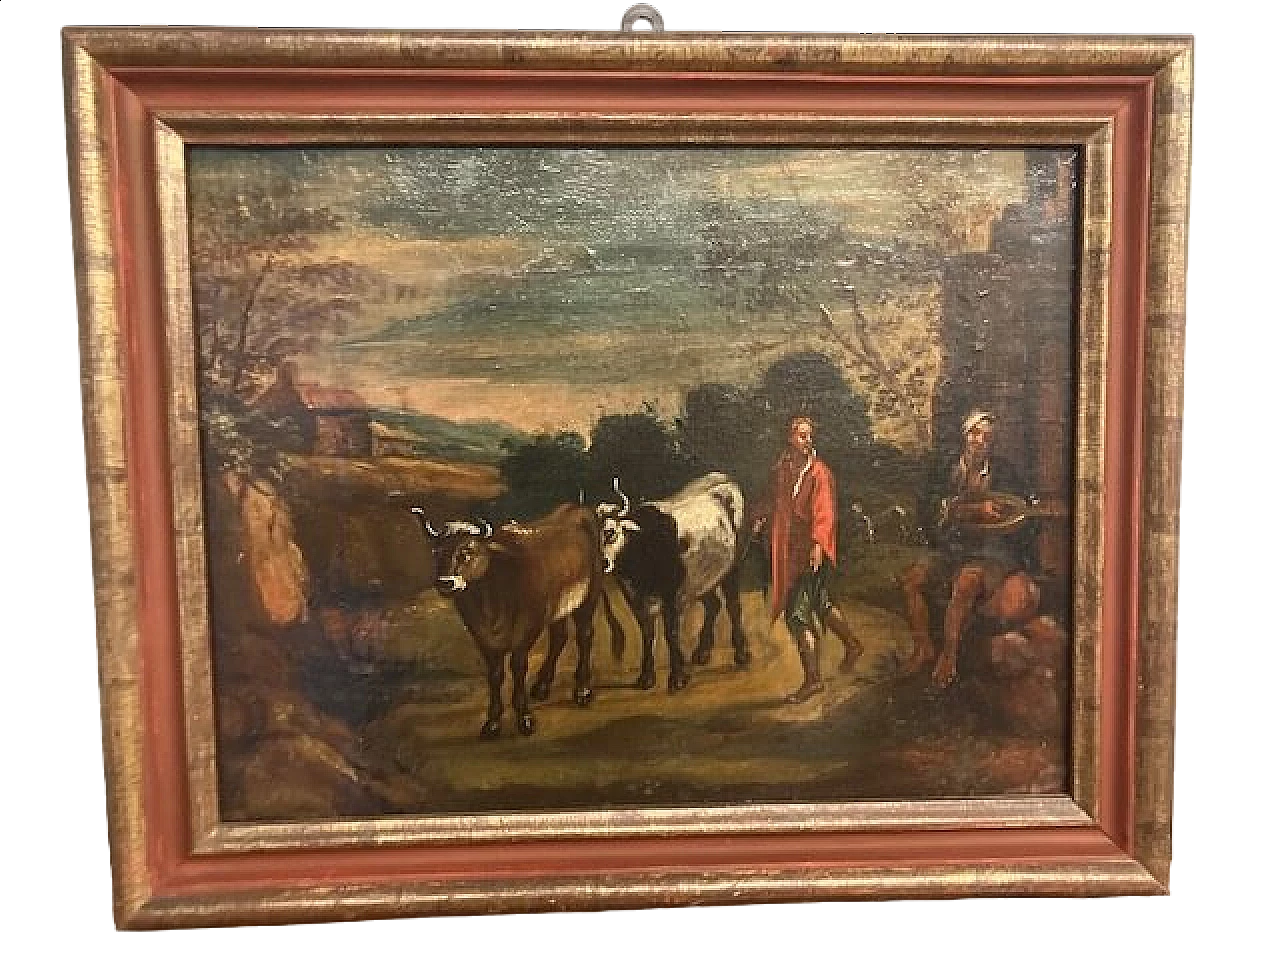 Landscape with oxen and peasants, oil painting on canvas, 17th century 15